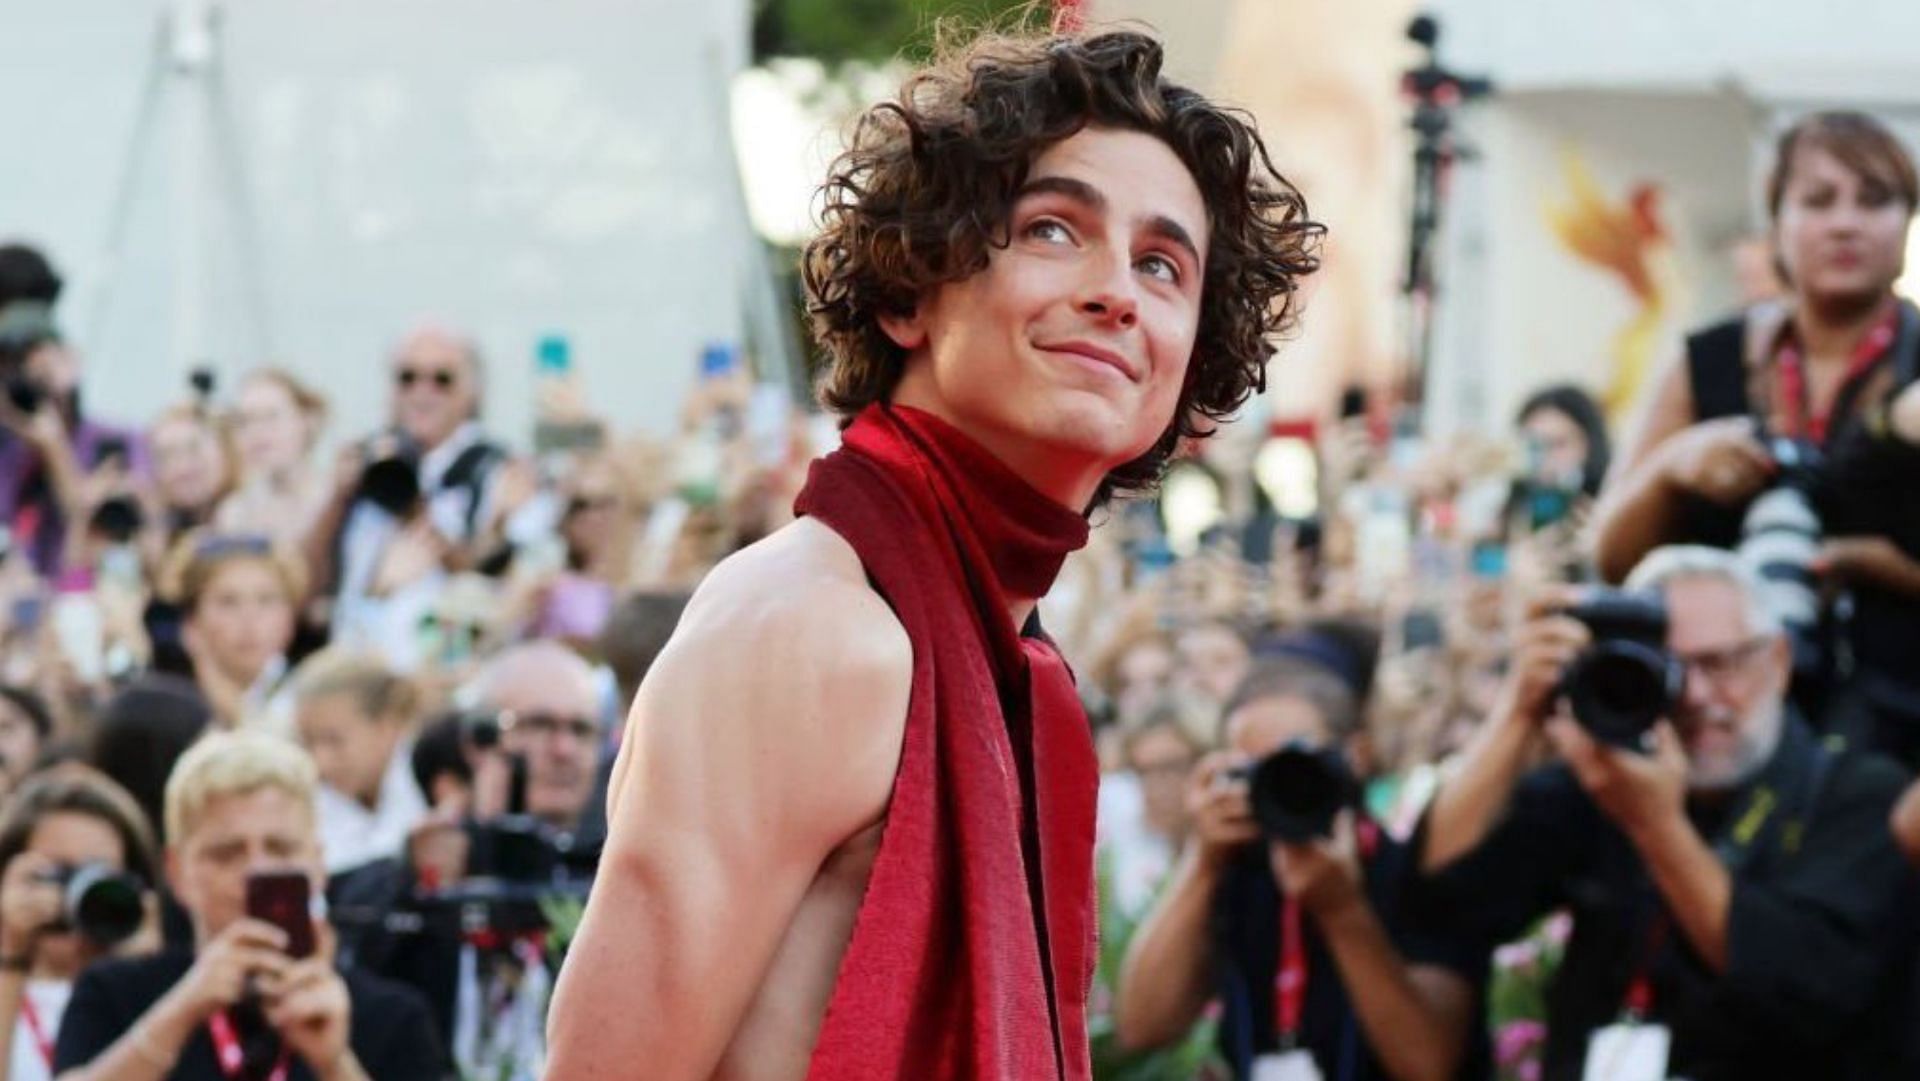 Timothee Chalamet thinks &quot;societal collapse&quot; is in the air because of this social media age. (Image via @iam4nnx28/Twitter)